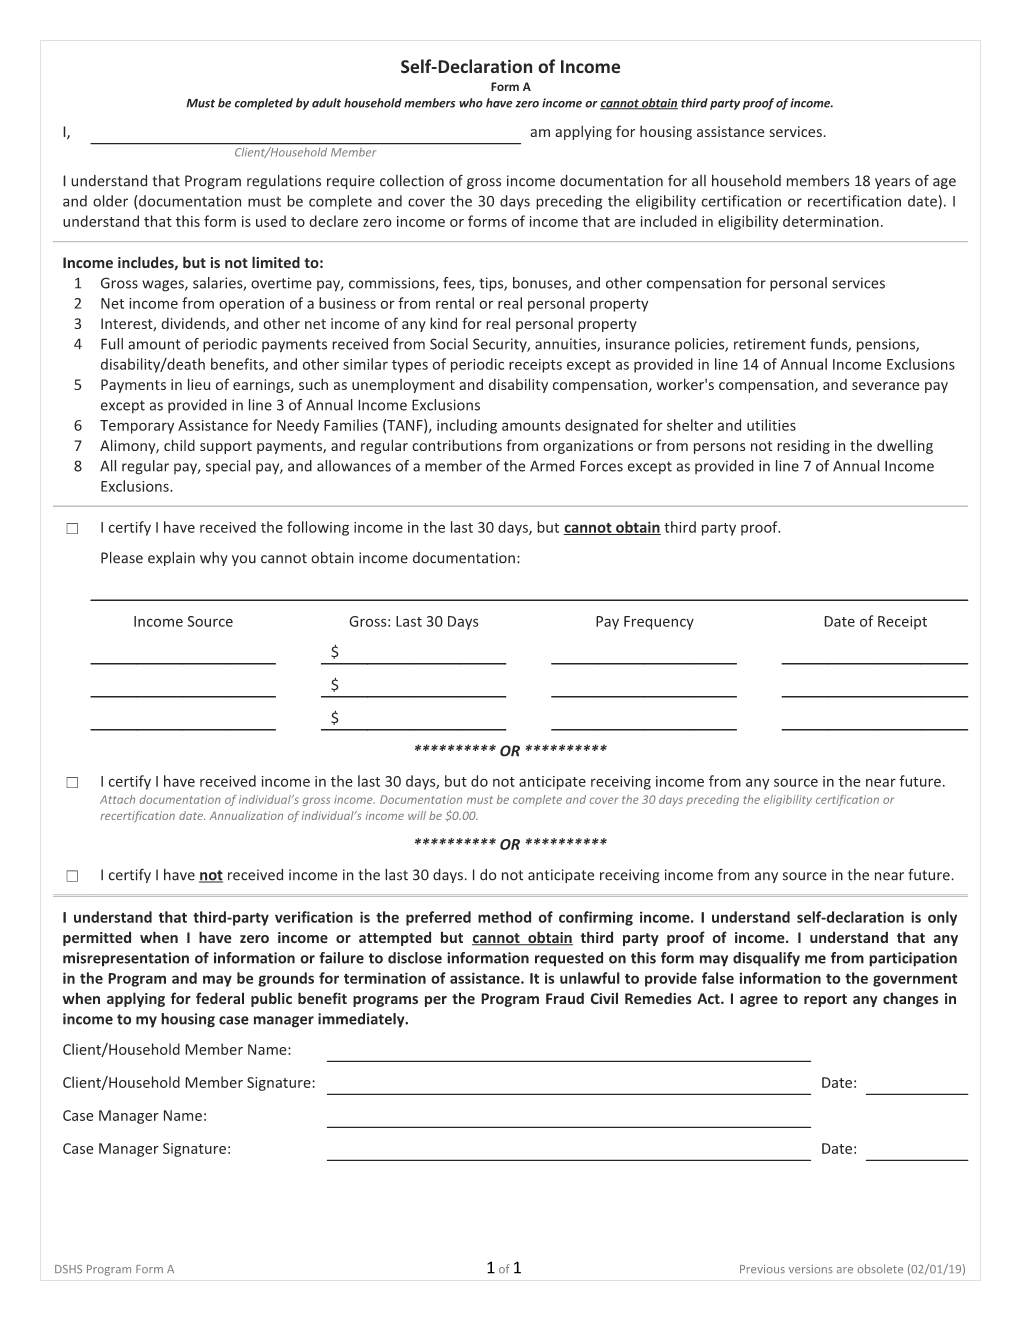 DSHS Program Form A1 of 1Previous Versions Are Obsolete (02/01/19)